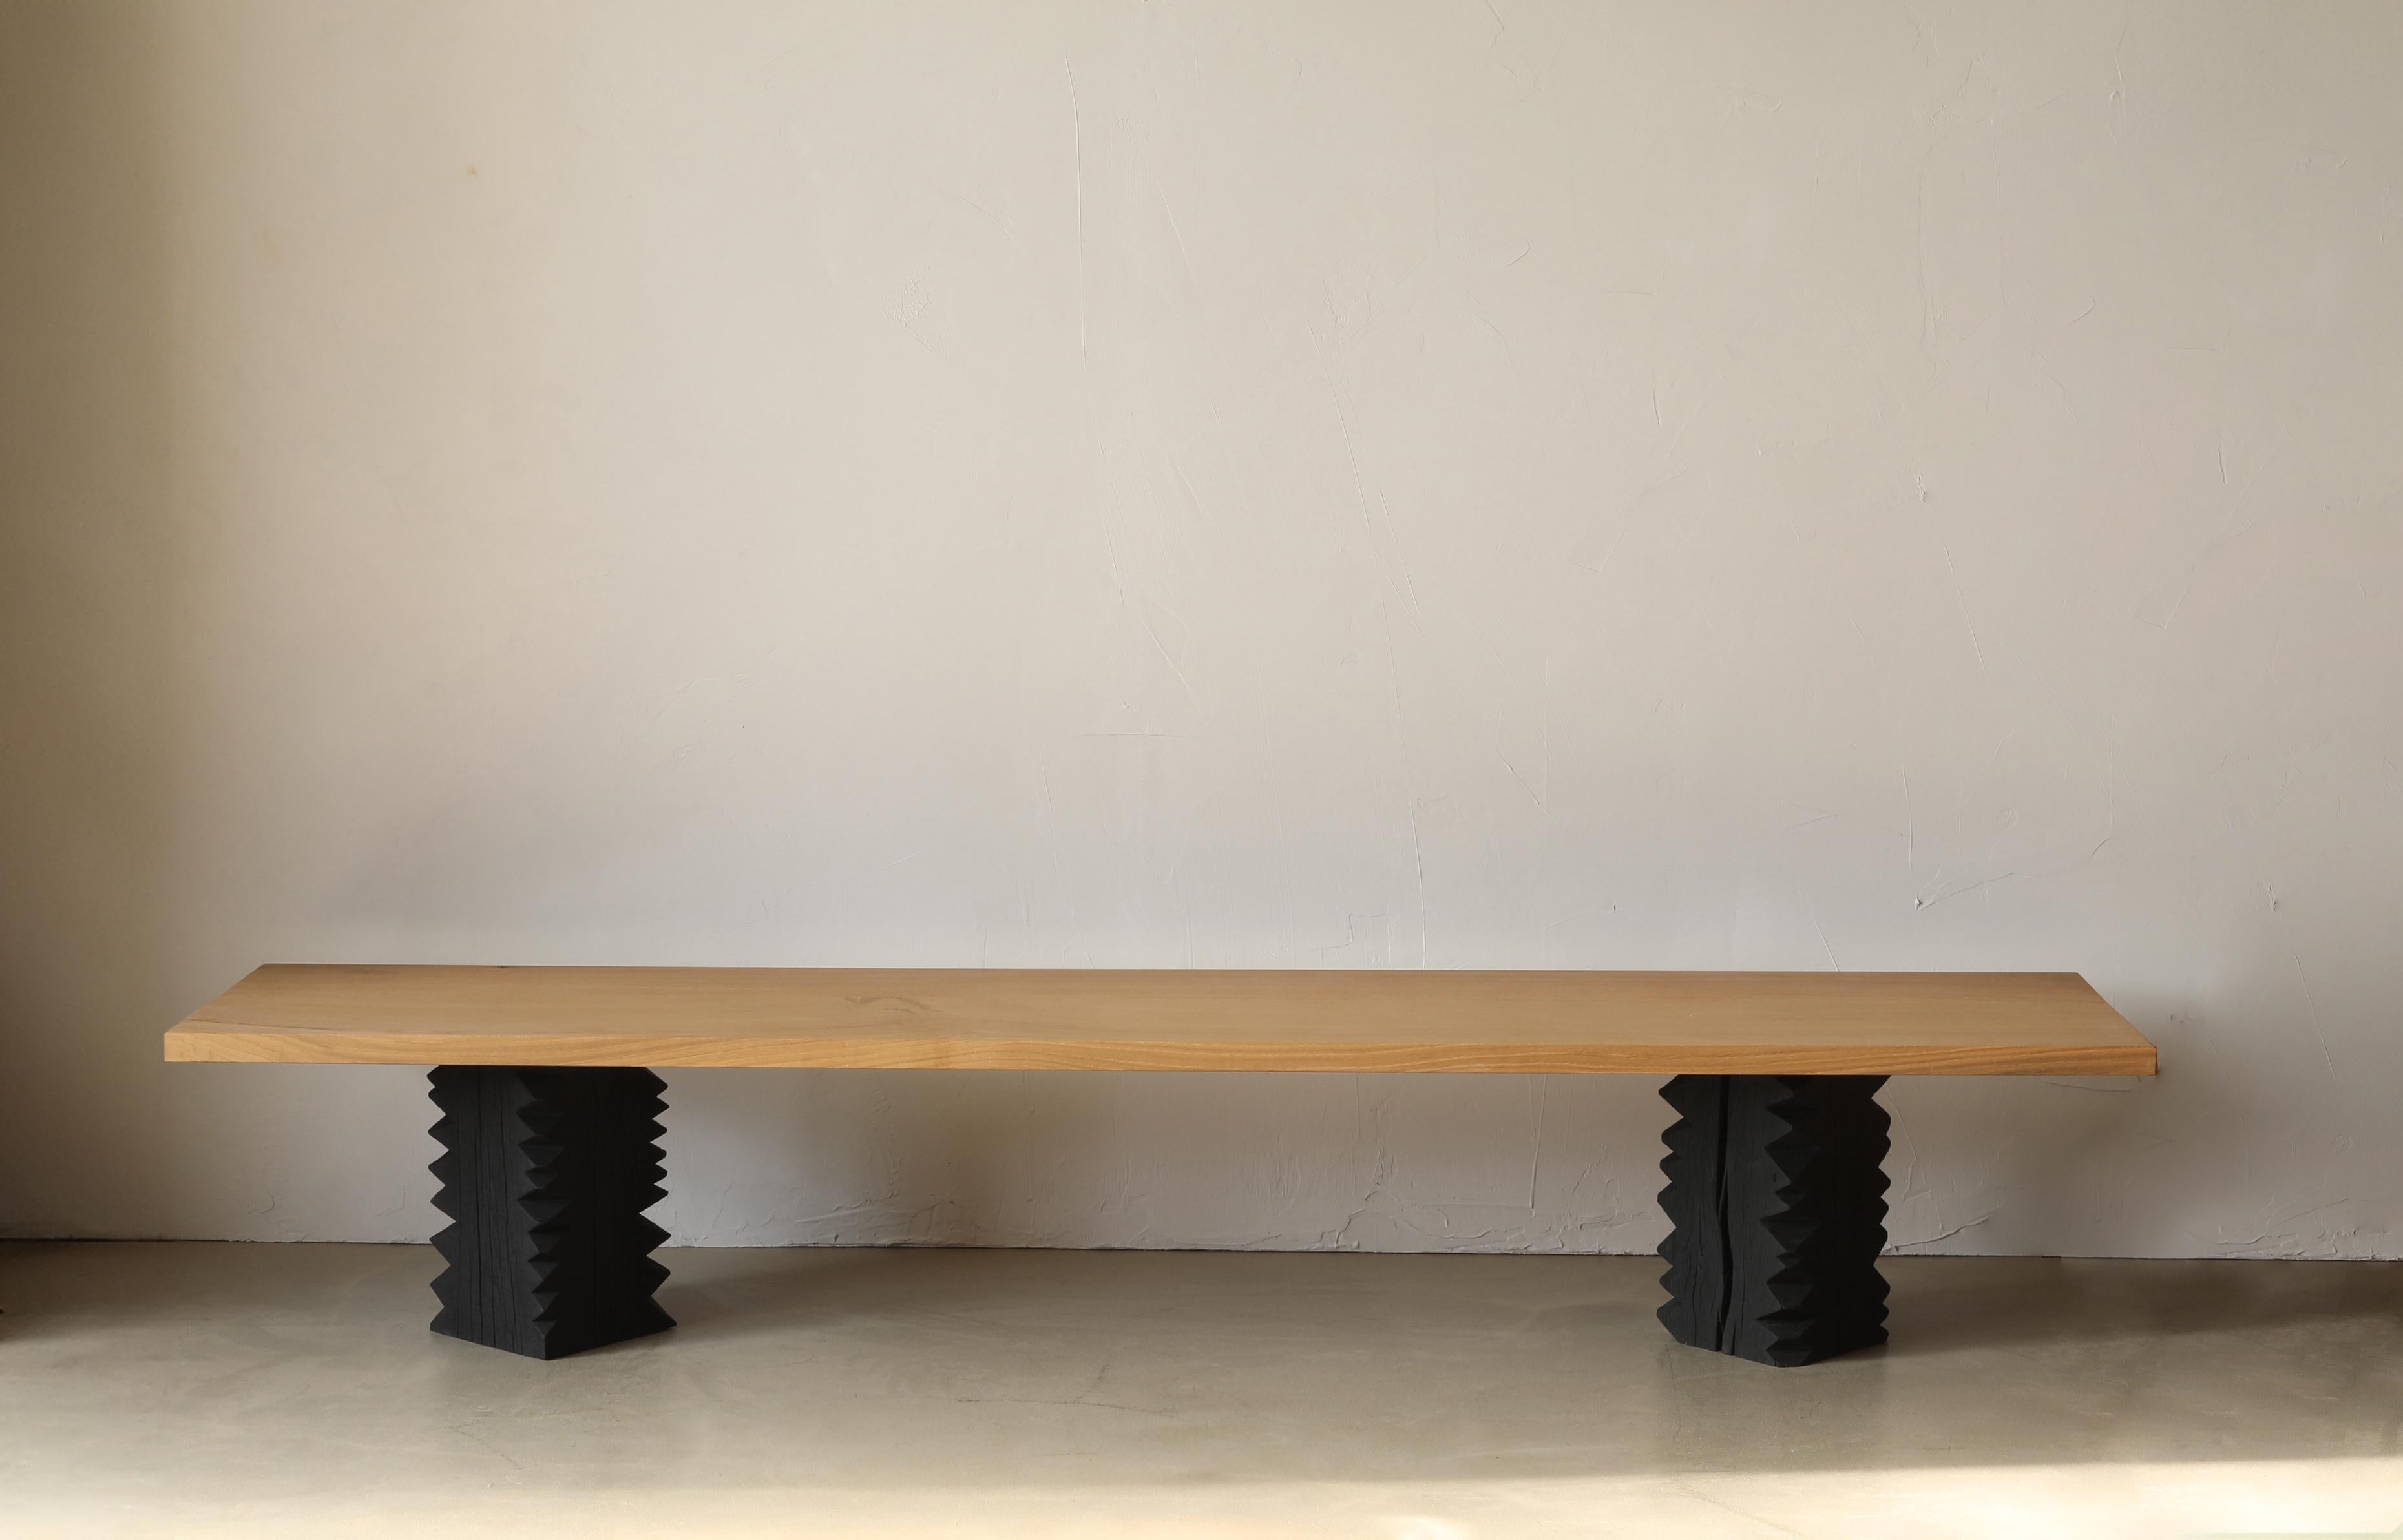 Notch II is a 16-inch tall bench. The clean and simple benchtop plays off the jagged legs. The Notch collection finds its foundation in ‘cribbage’,  a rough-cut lumber used to build support structures called ‘cribs’ in coal mines. This material